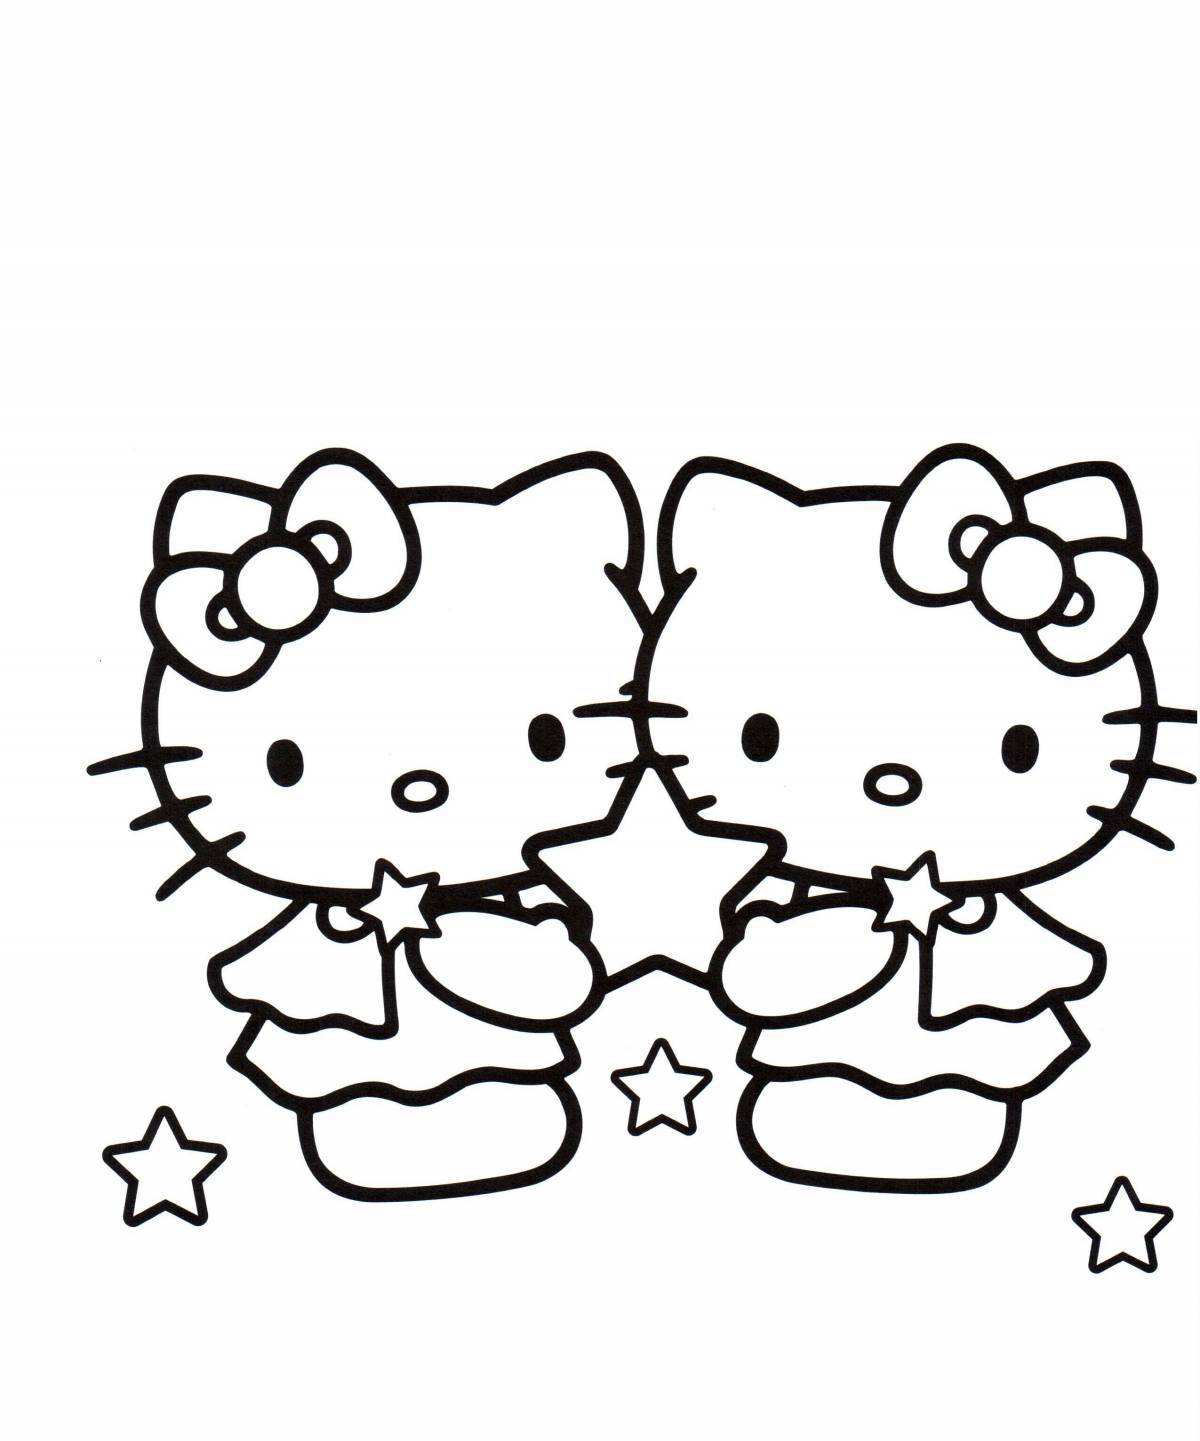 Cute kuromi and hello kitty coloring book